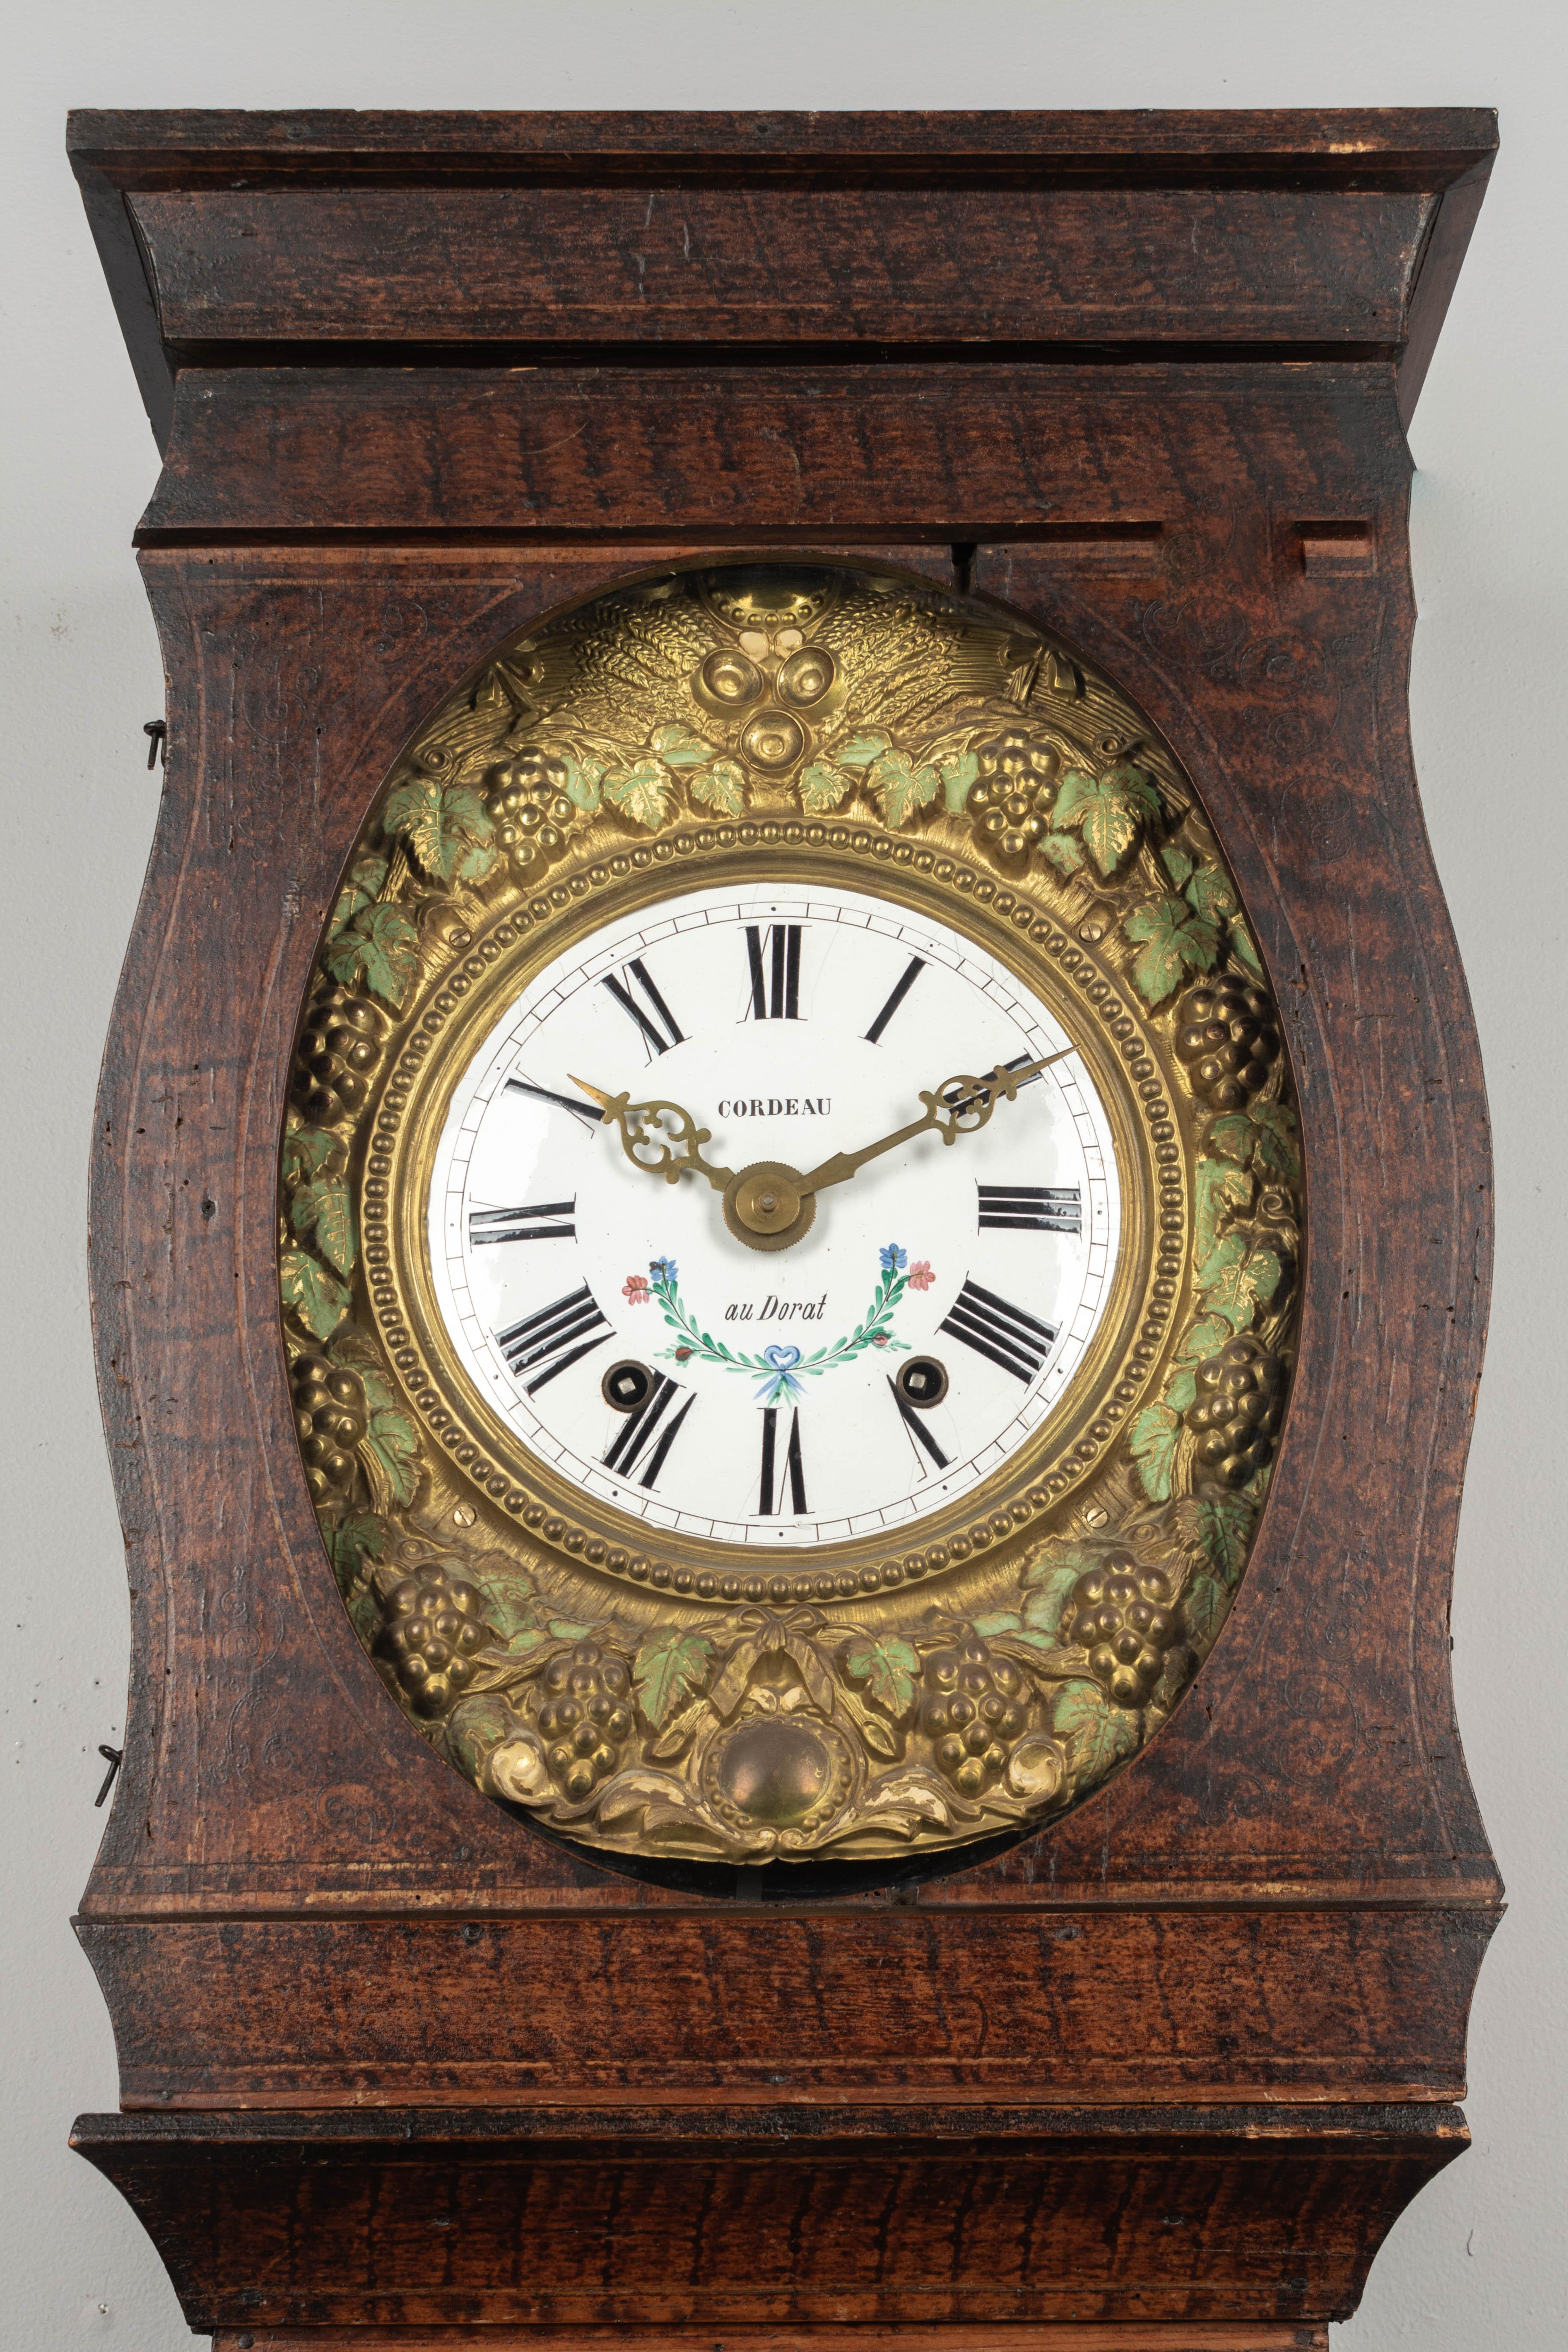 French Provincial 19th Century French Comtoise Grandfather Clock